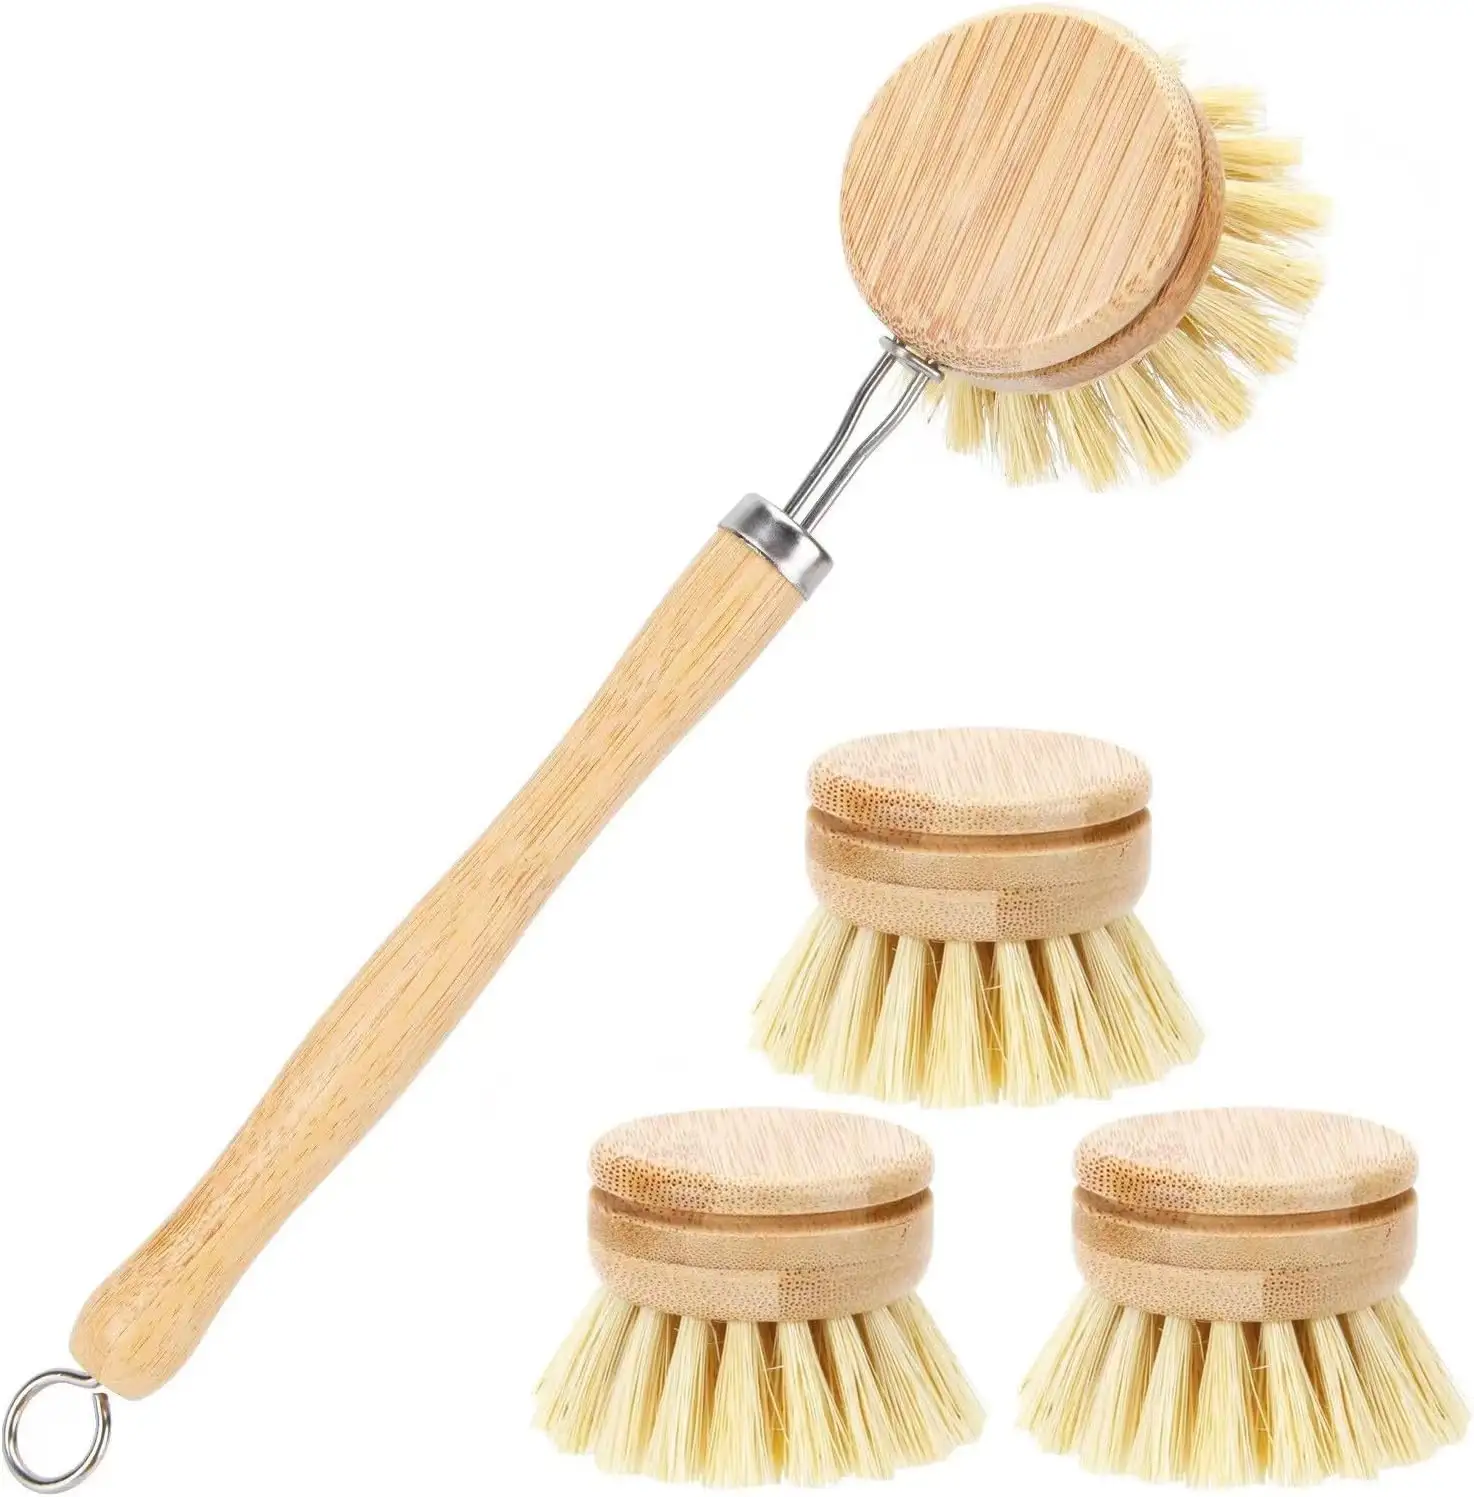 Bamboo Dish Brush with 4 Replacement Heads Eco Friendly Products Natural Dish Scrub Brush Durable Cleaning Brush Set